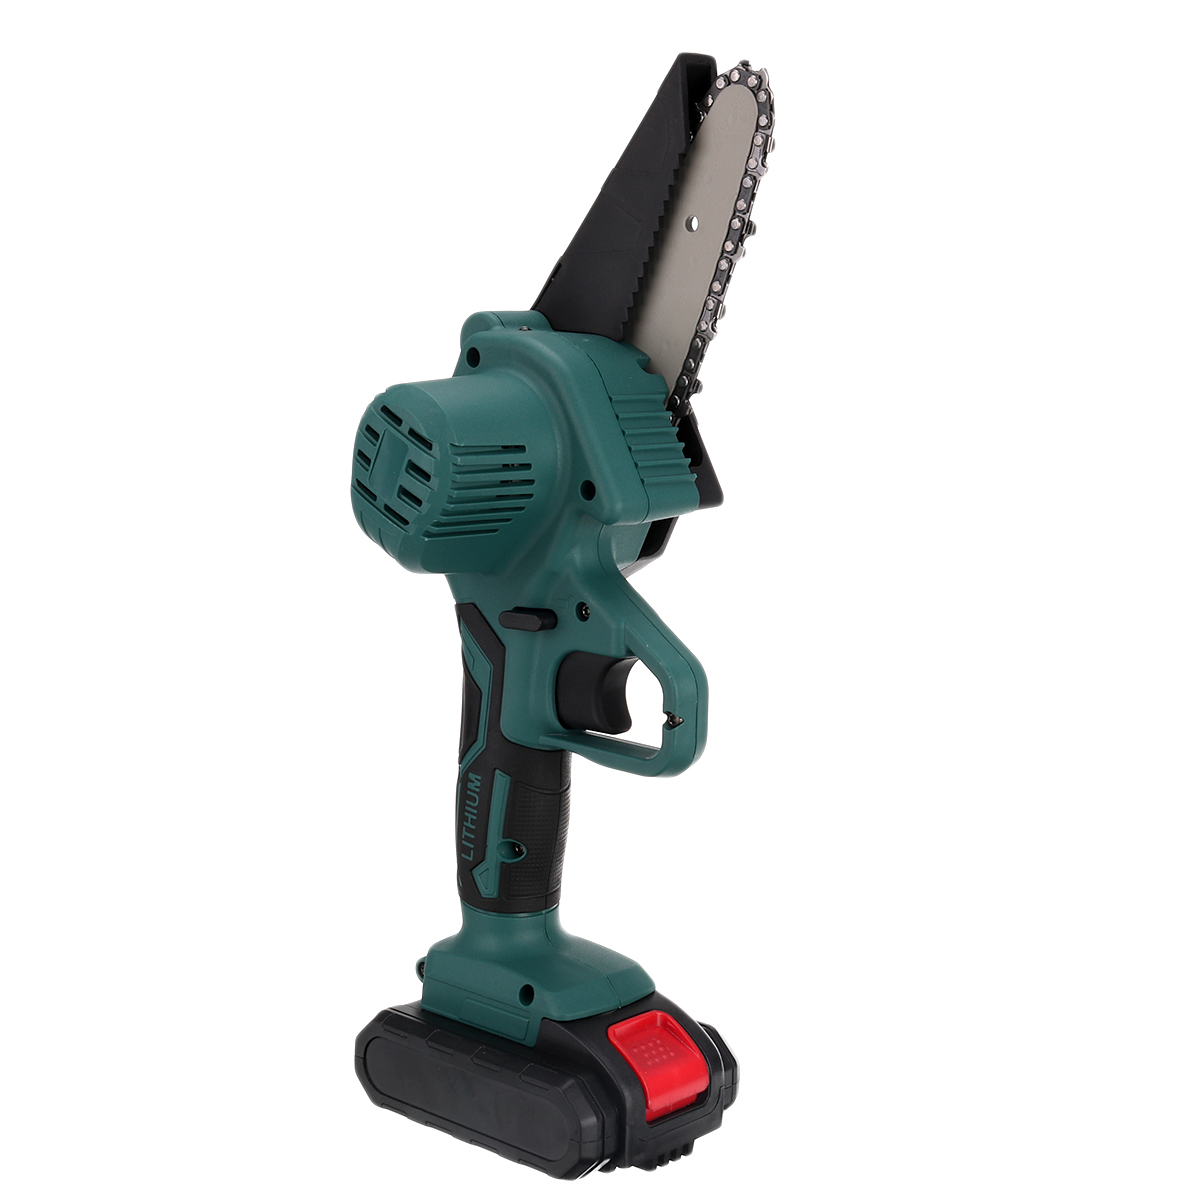 4-Inch-Cordless-Electric-Pruning-Saw-Rechargeable-One-handed-Woodworking-Tool-Mini-Chain-Saw-For-Woo-1850641-6